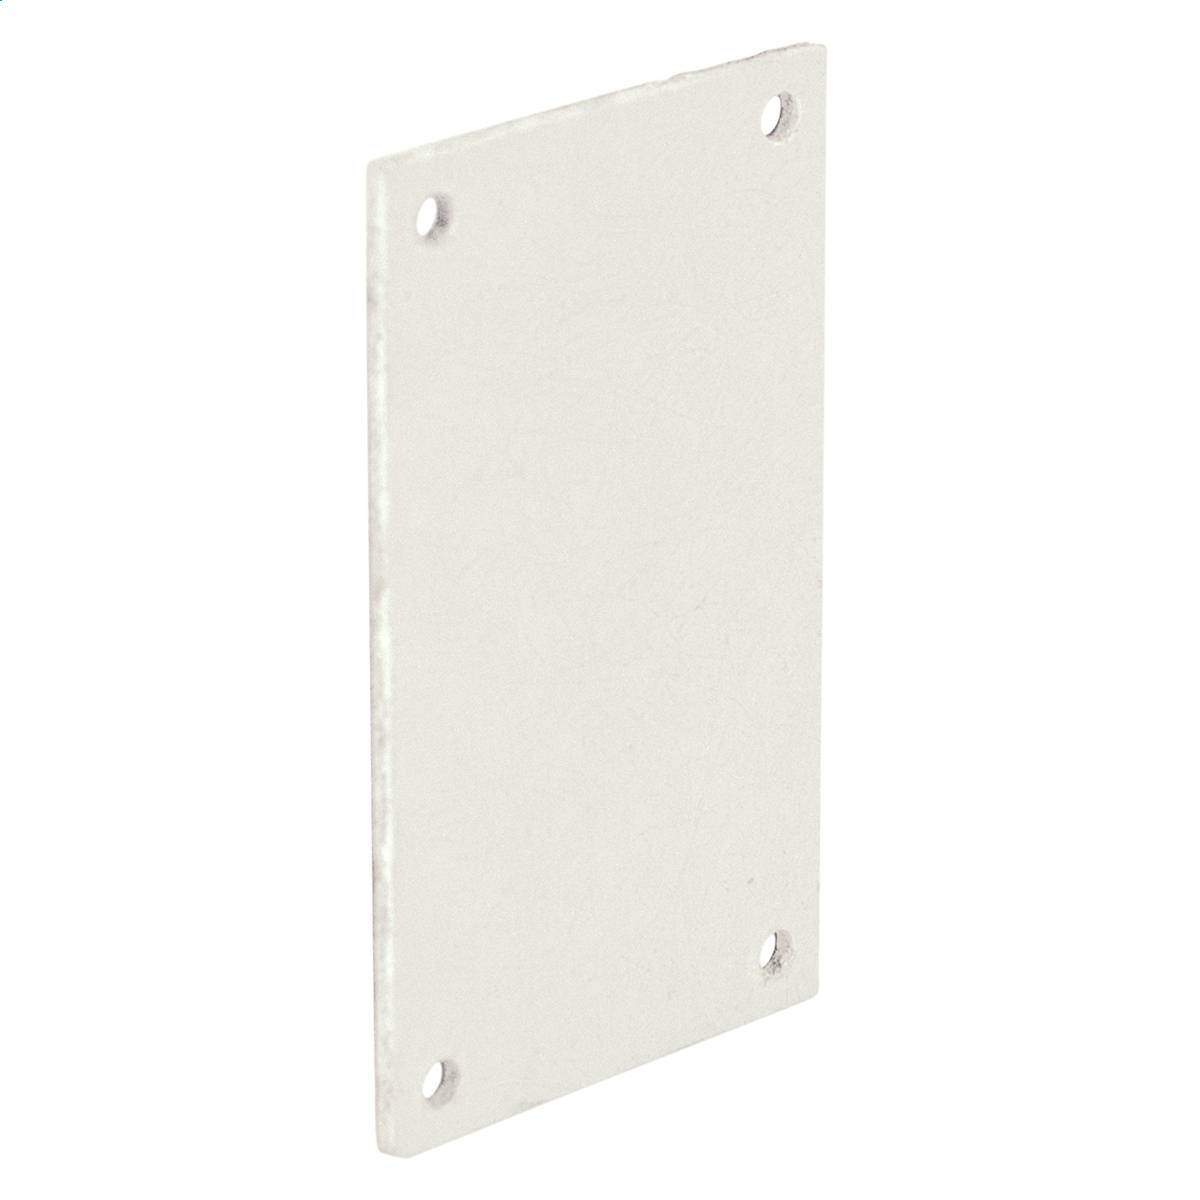 Wiegmann® P1412 Non-Flanged Rectangular Back Panel, 10.88 in W x 12.88 in H, Carbon Steel, White